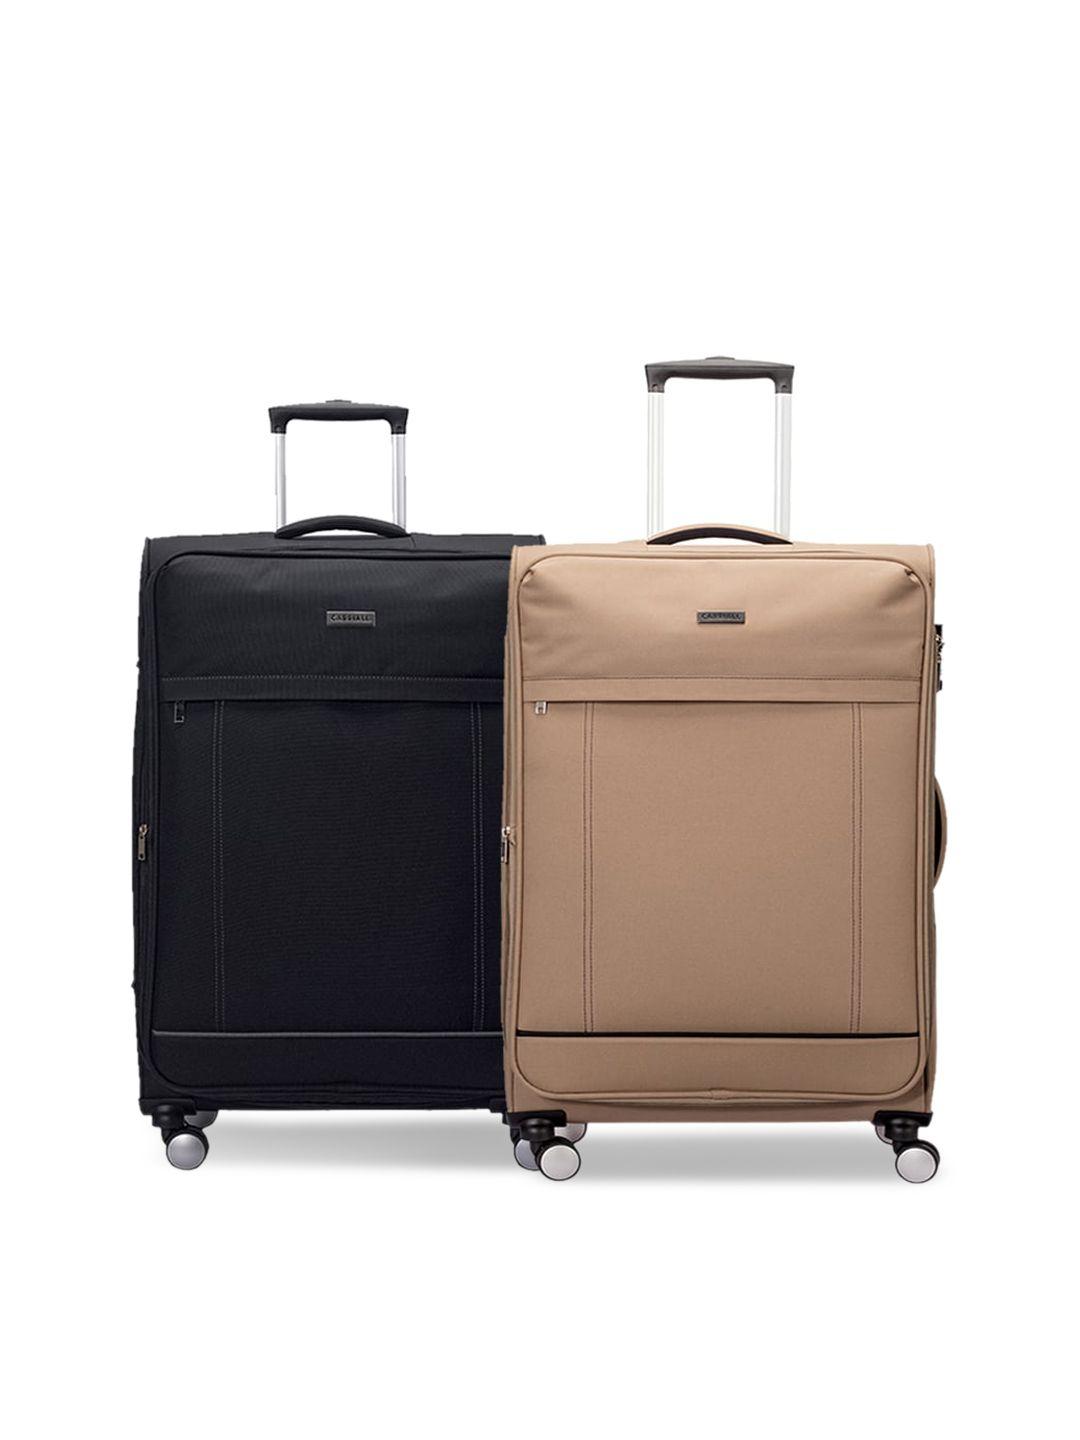 carriall set of 2 black & beige solid trolley bags